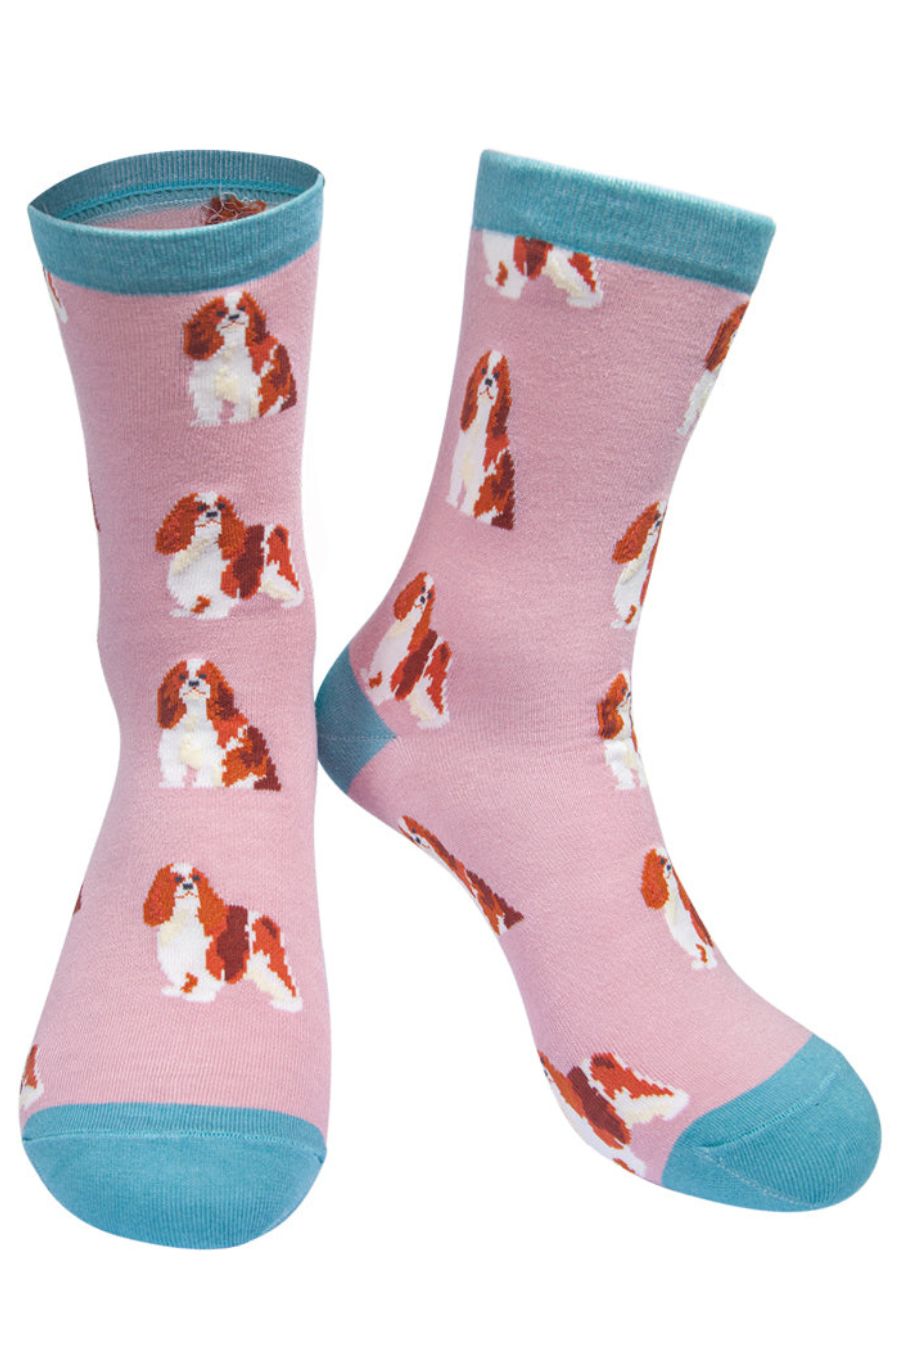 pink and blue bamboo socks with a pattern of king charles spaniels on them